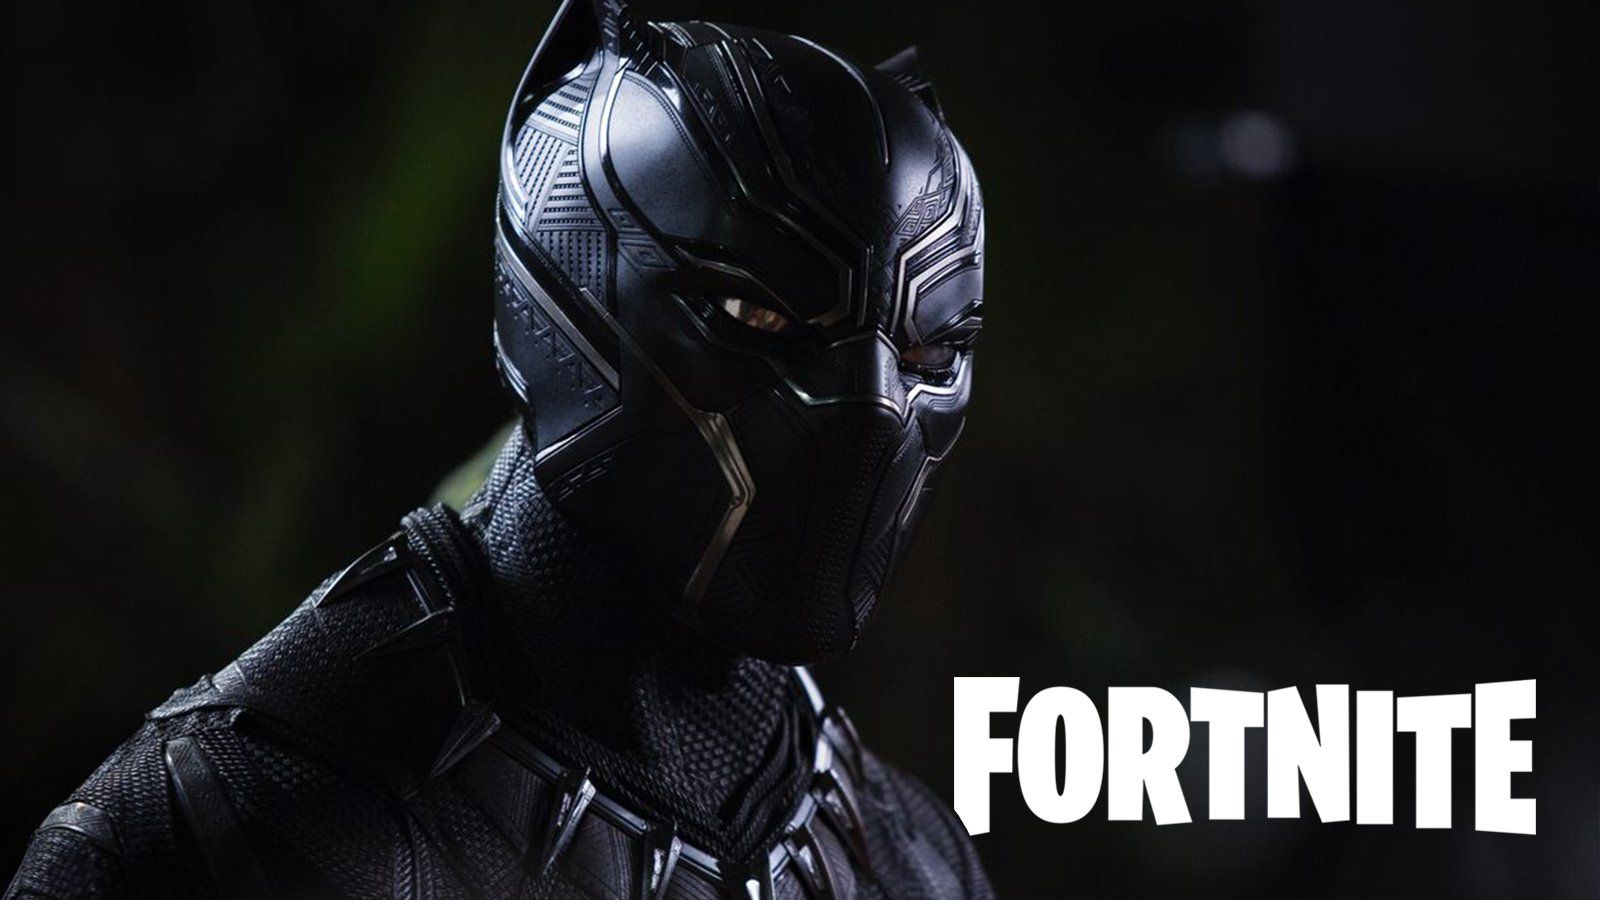 Fortnite Black Panther skin details, POI & abilities leaked